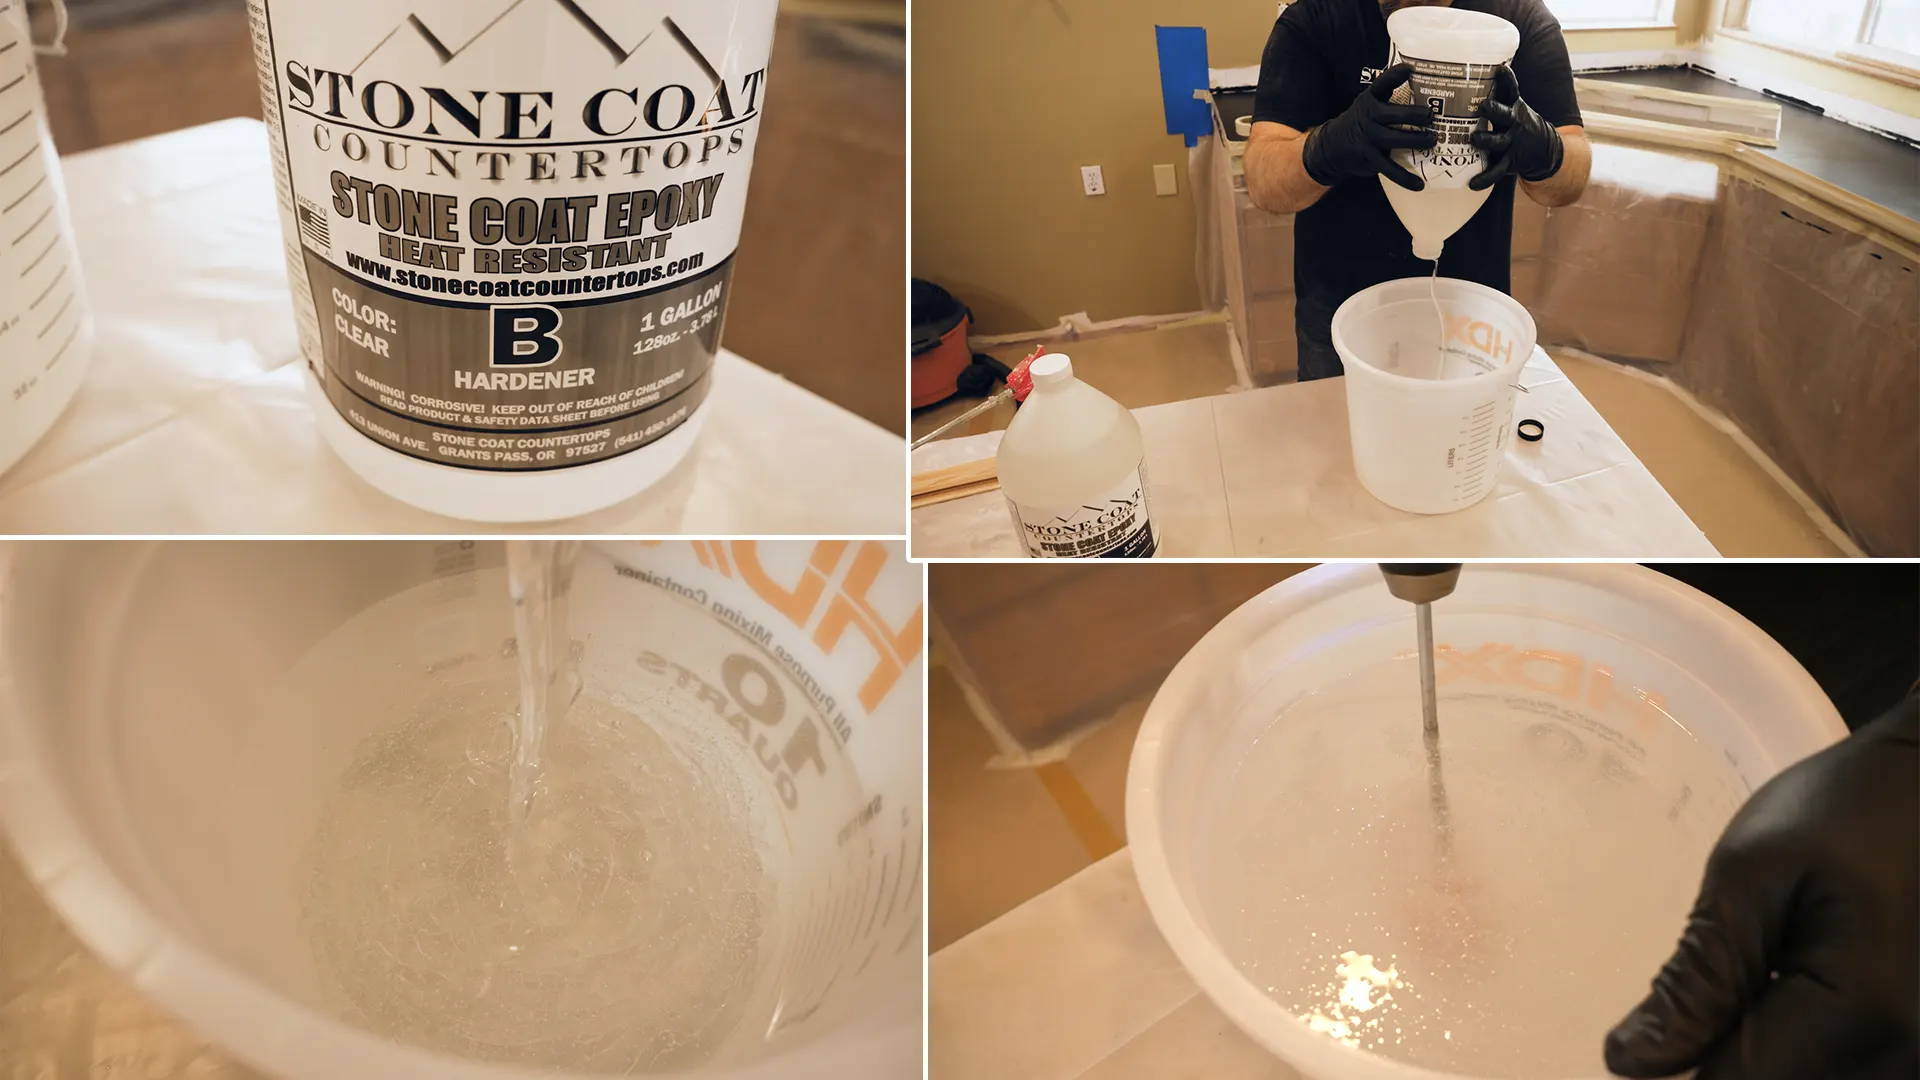 Mixing Stone Coat Countertop Epoxy at a 1:1 ratio, 3 ounces per square foot, for 2 minutes using a drill and paddle mixer.